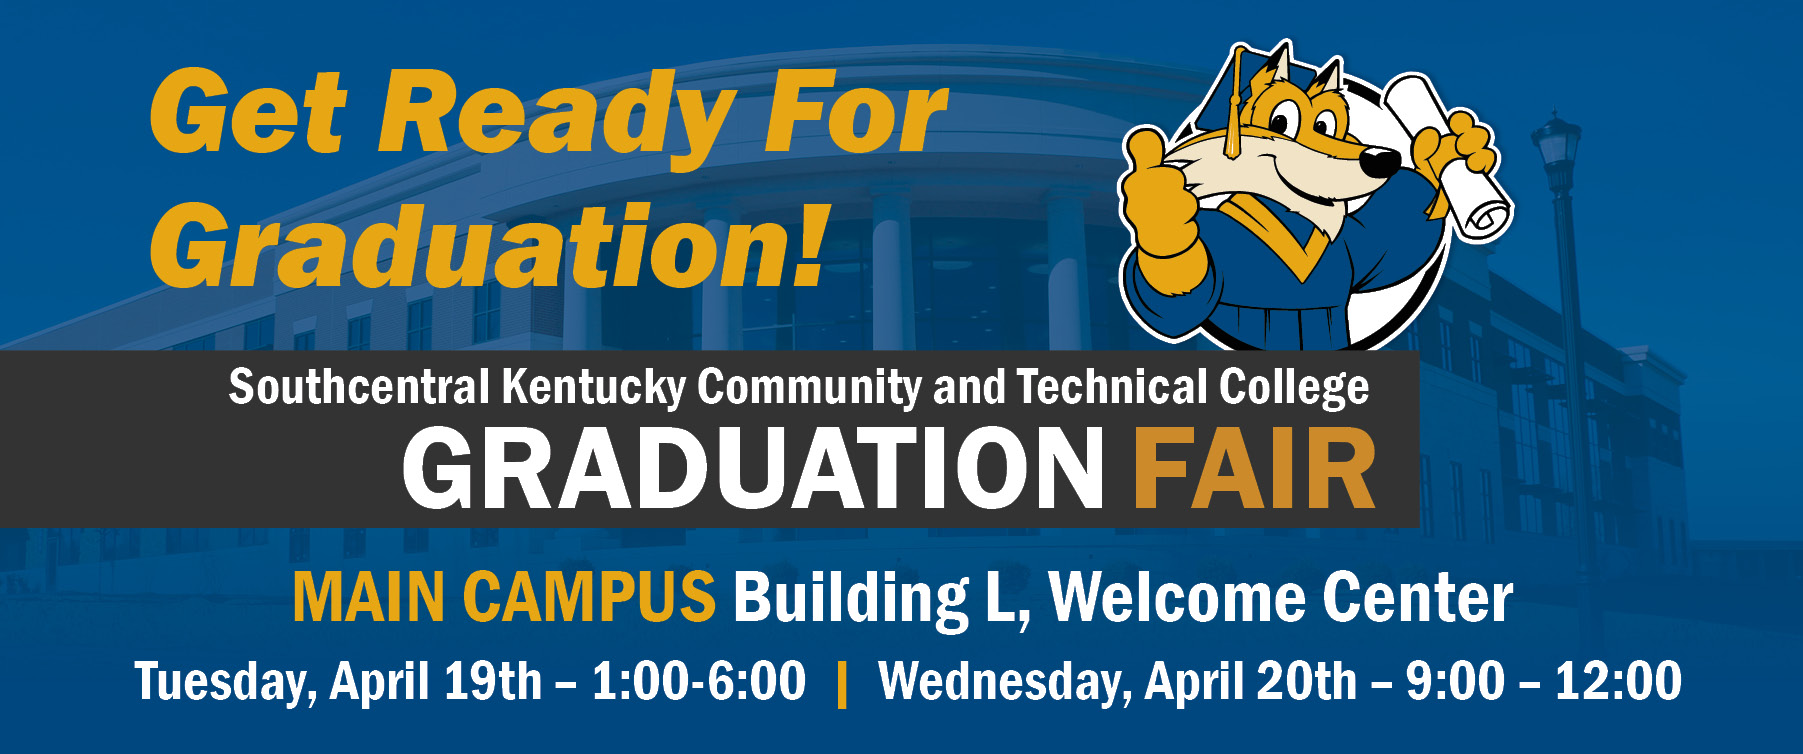 Get Ready for Graduation! SKYCTC Graduation Fair is Tuesday, April 19th 1:00 - 6:00pm and Wednesday, April 20th 9:00 a.m. - 12:00 p.m.